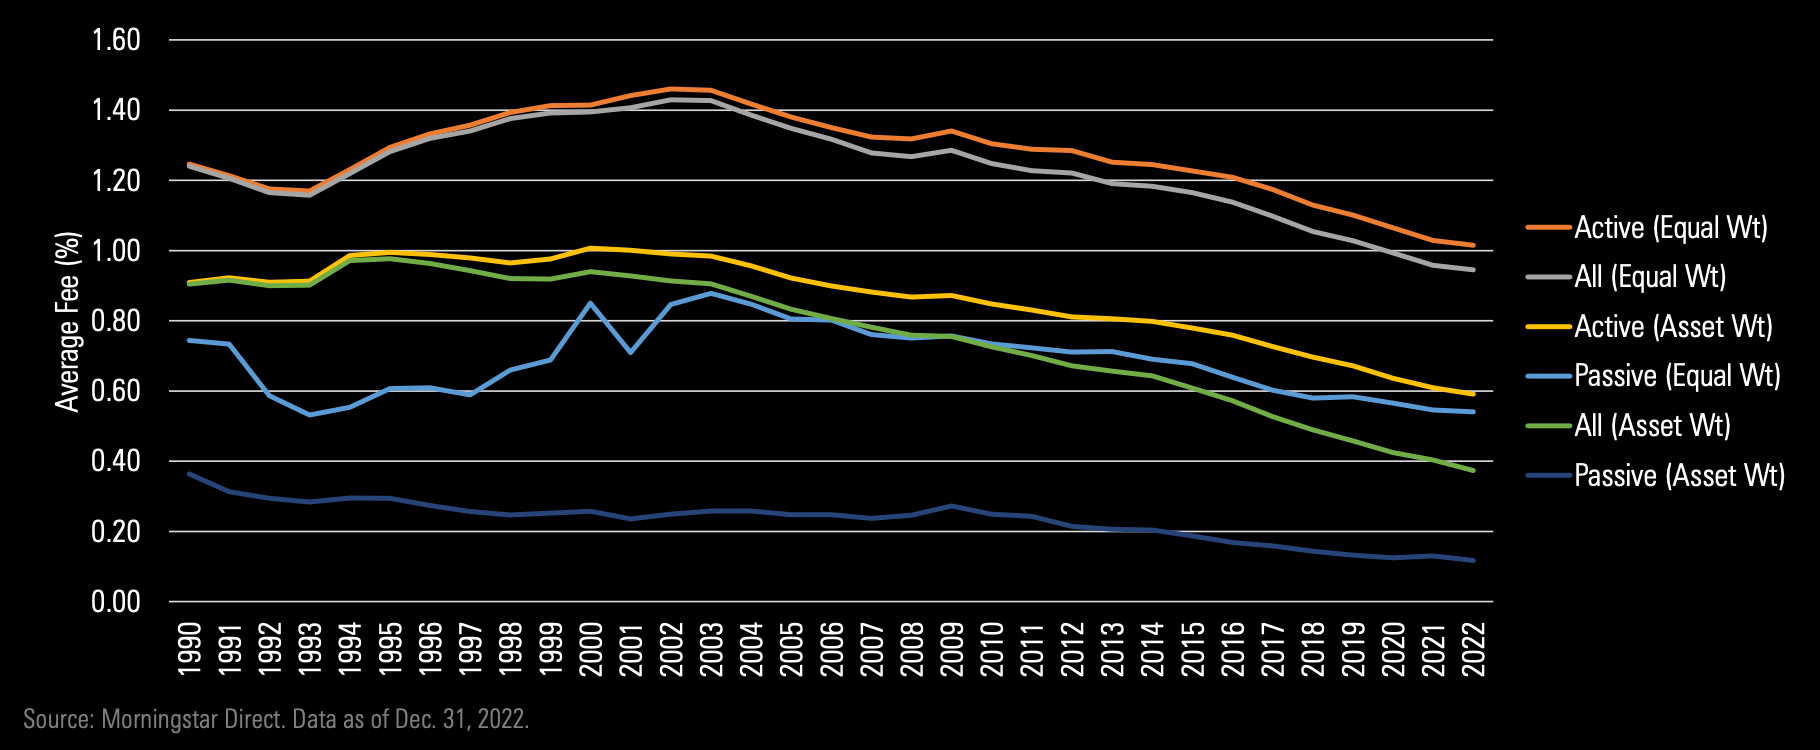 Line graph showing average fee of equal-weighted, passive-weighted, and more from 1990 to 2022.